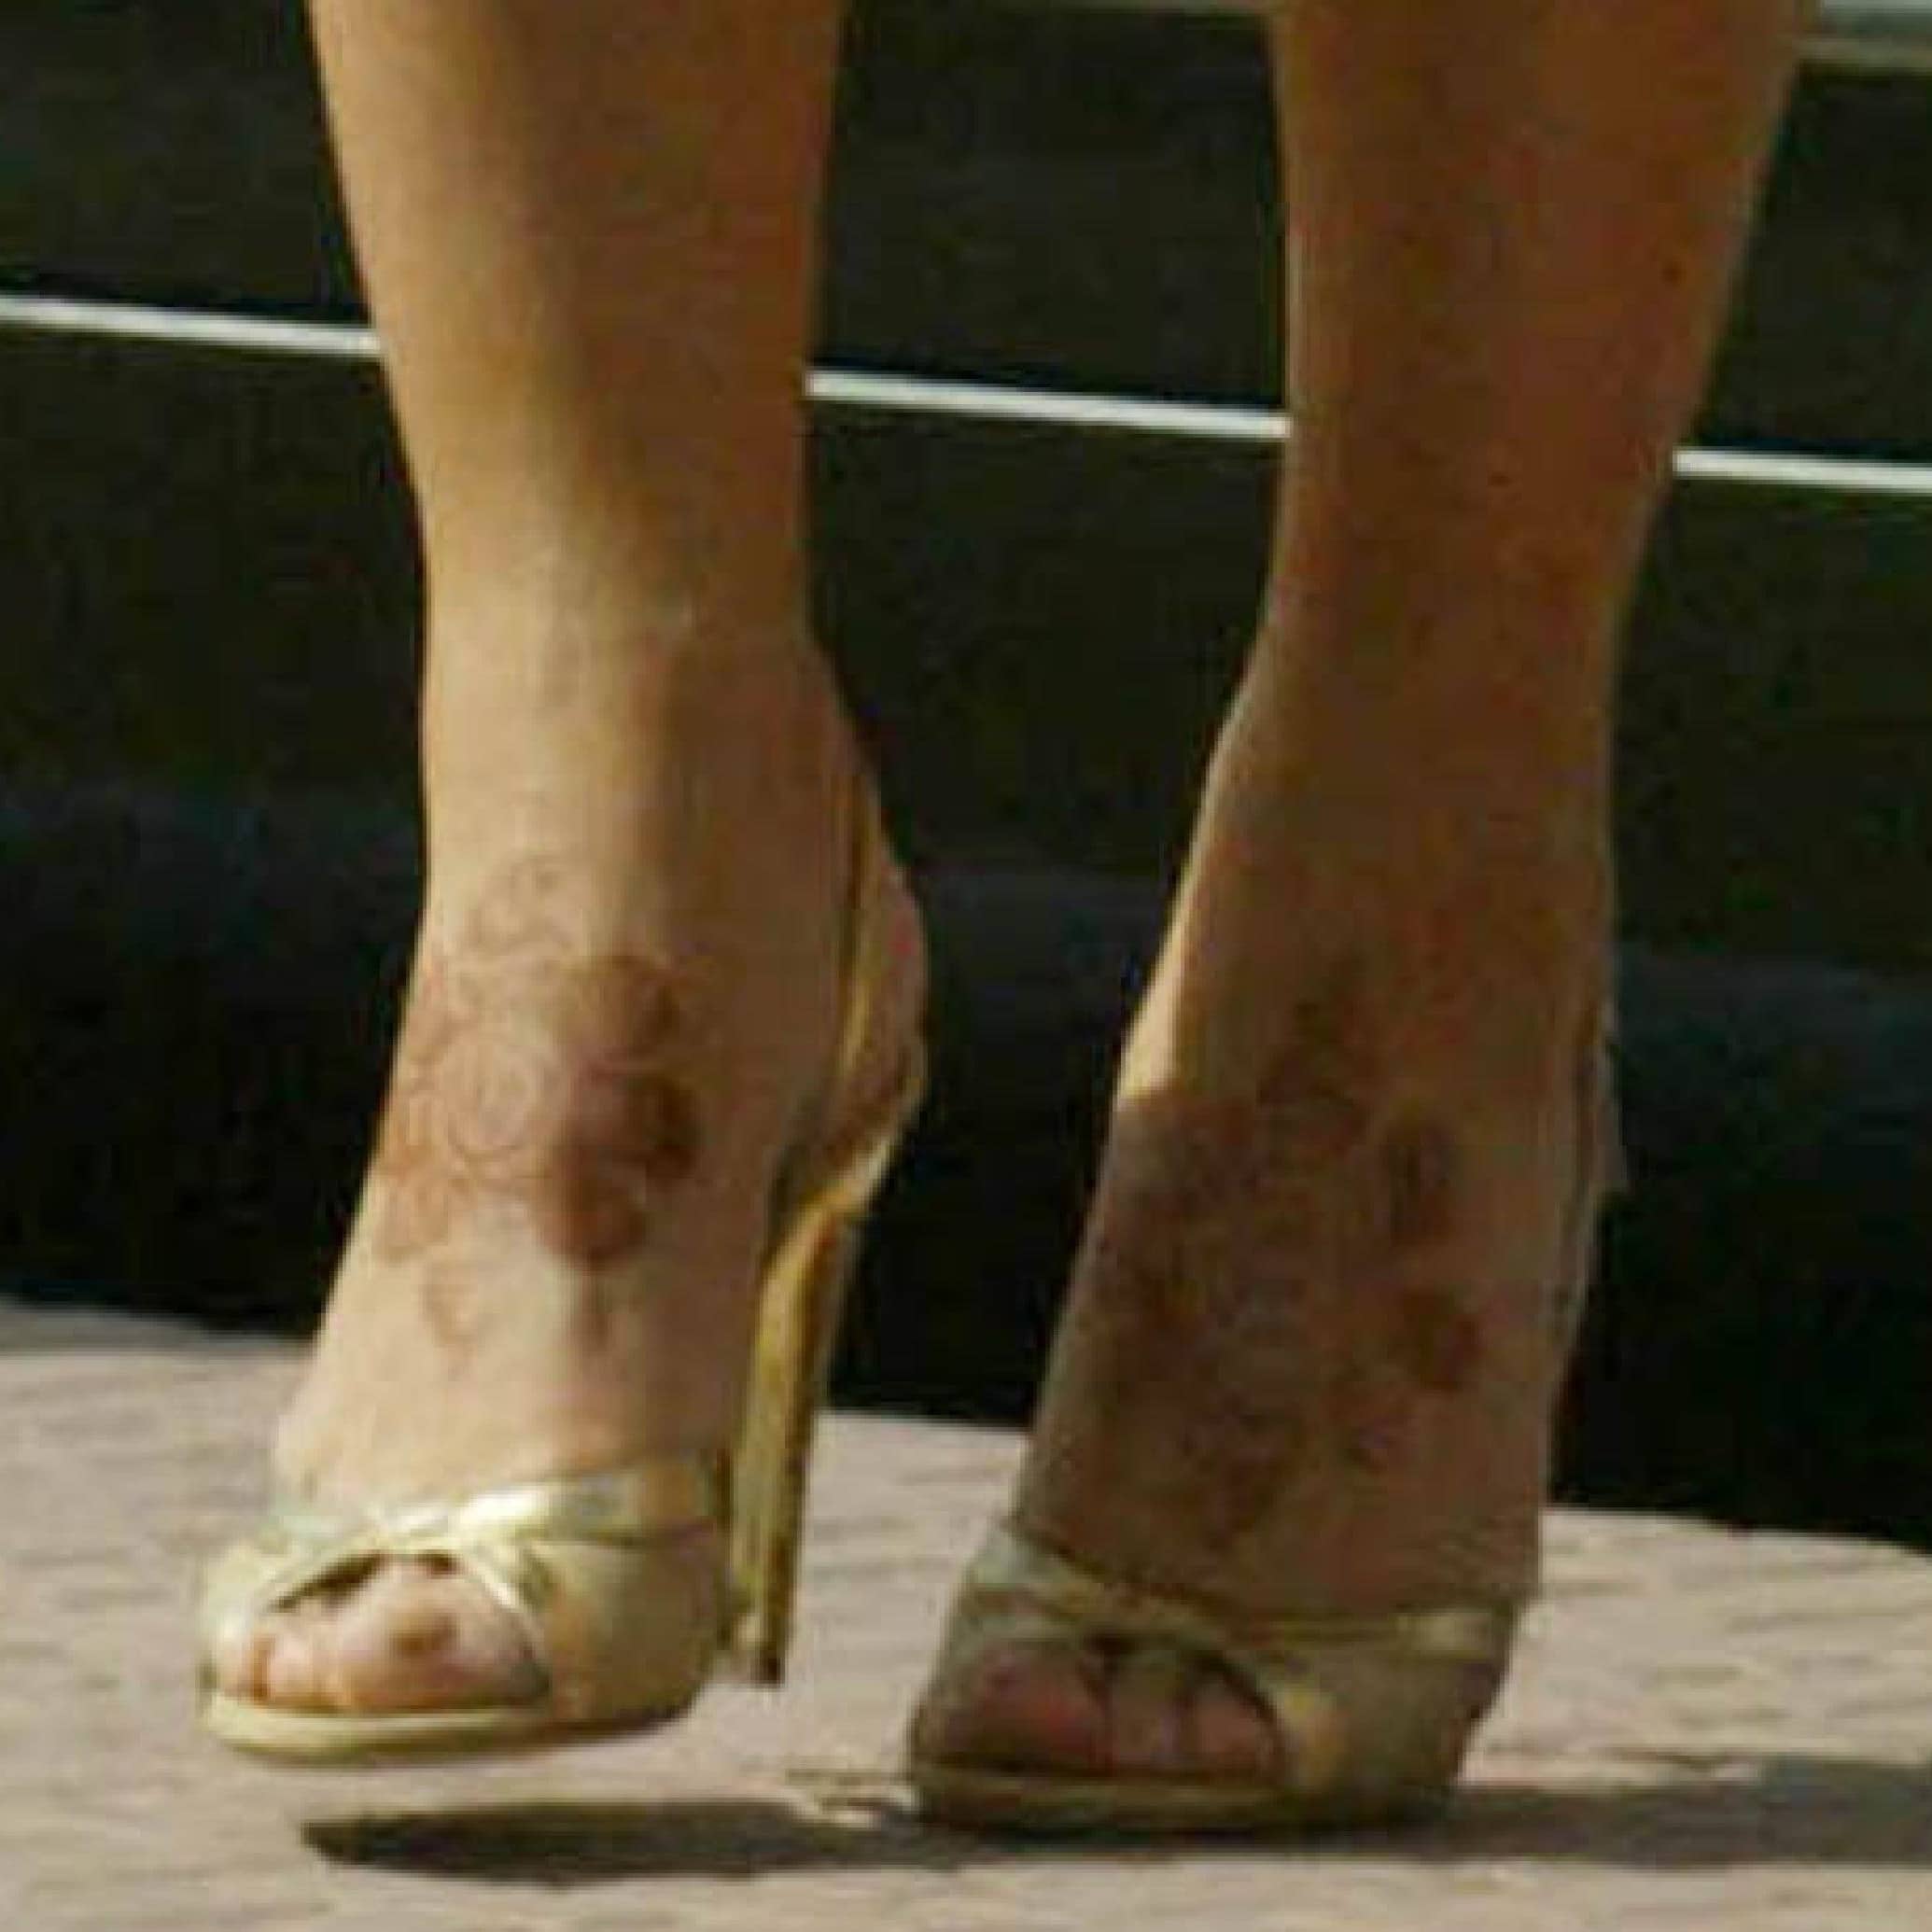 Elizabeth Hurley leaves Jodhpur Airport for Bombay with Henna tattoos on her feet